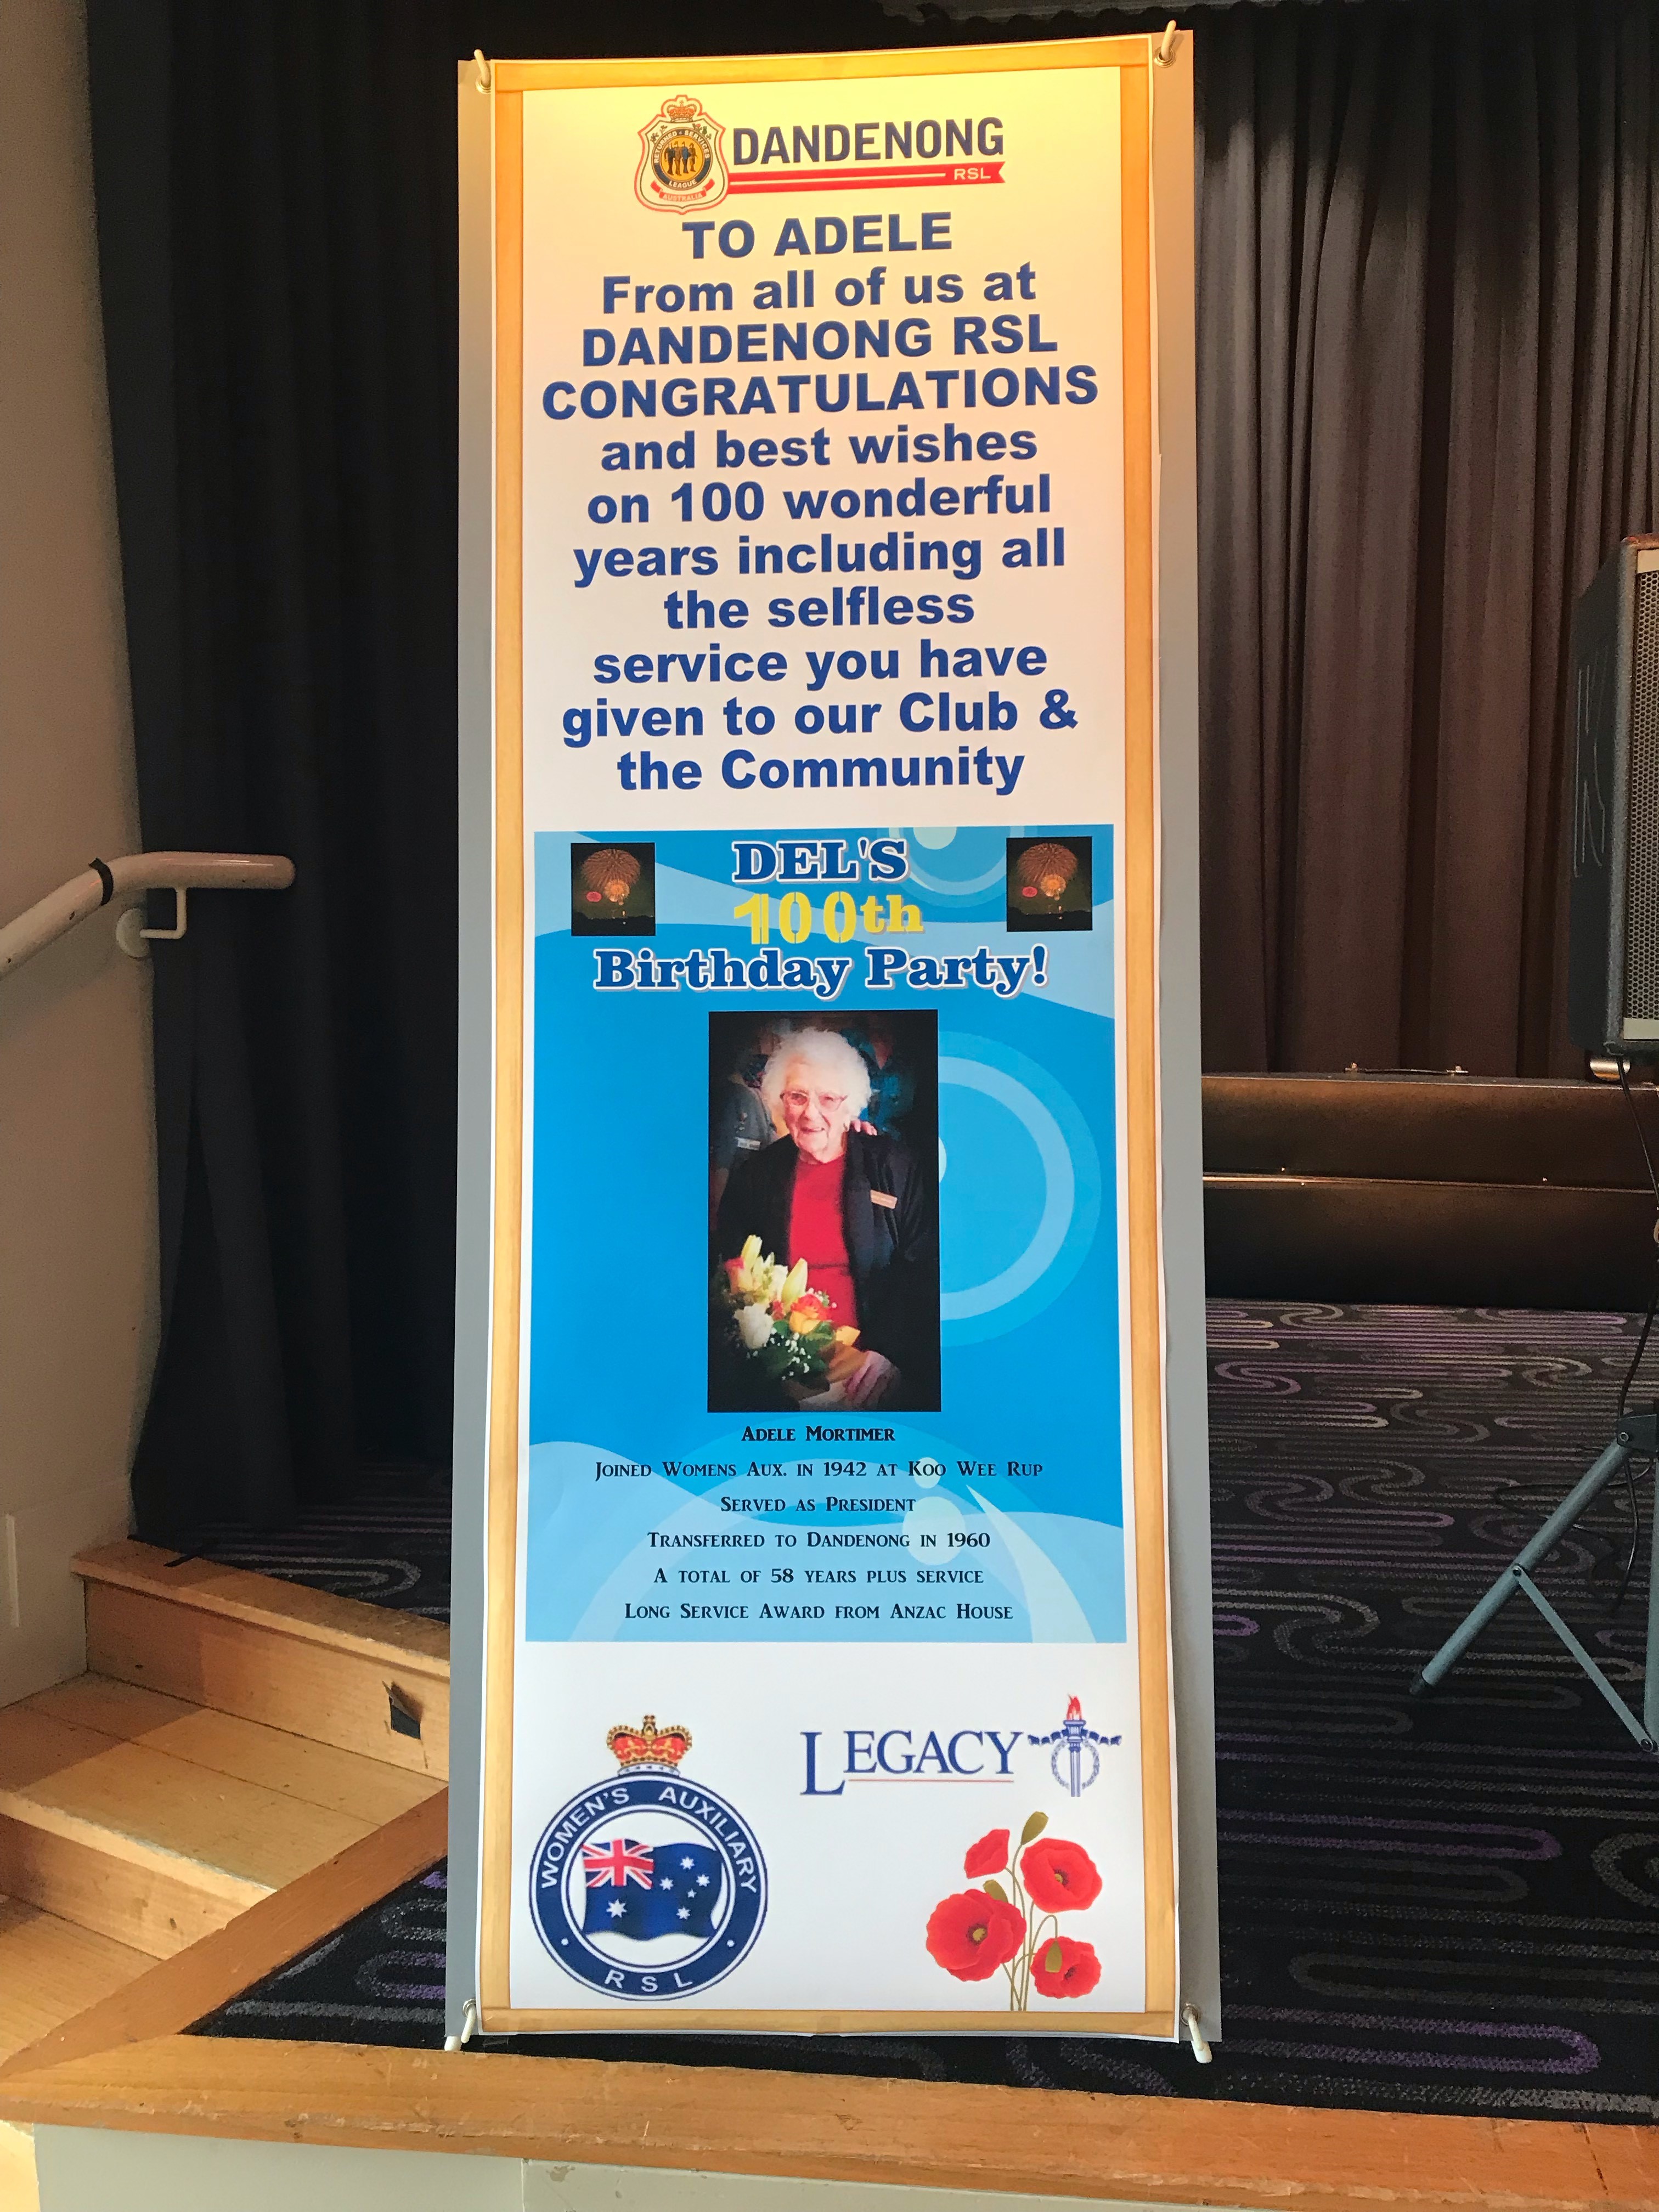 "A sign celebrating Adele that reads: "TO ADELE, From all of us at Dandenong RSL , CONGRATULATIONS, and best wishes on 100 wonderful years including all the selfless service you have given to our club and the community"